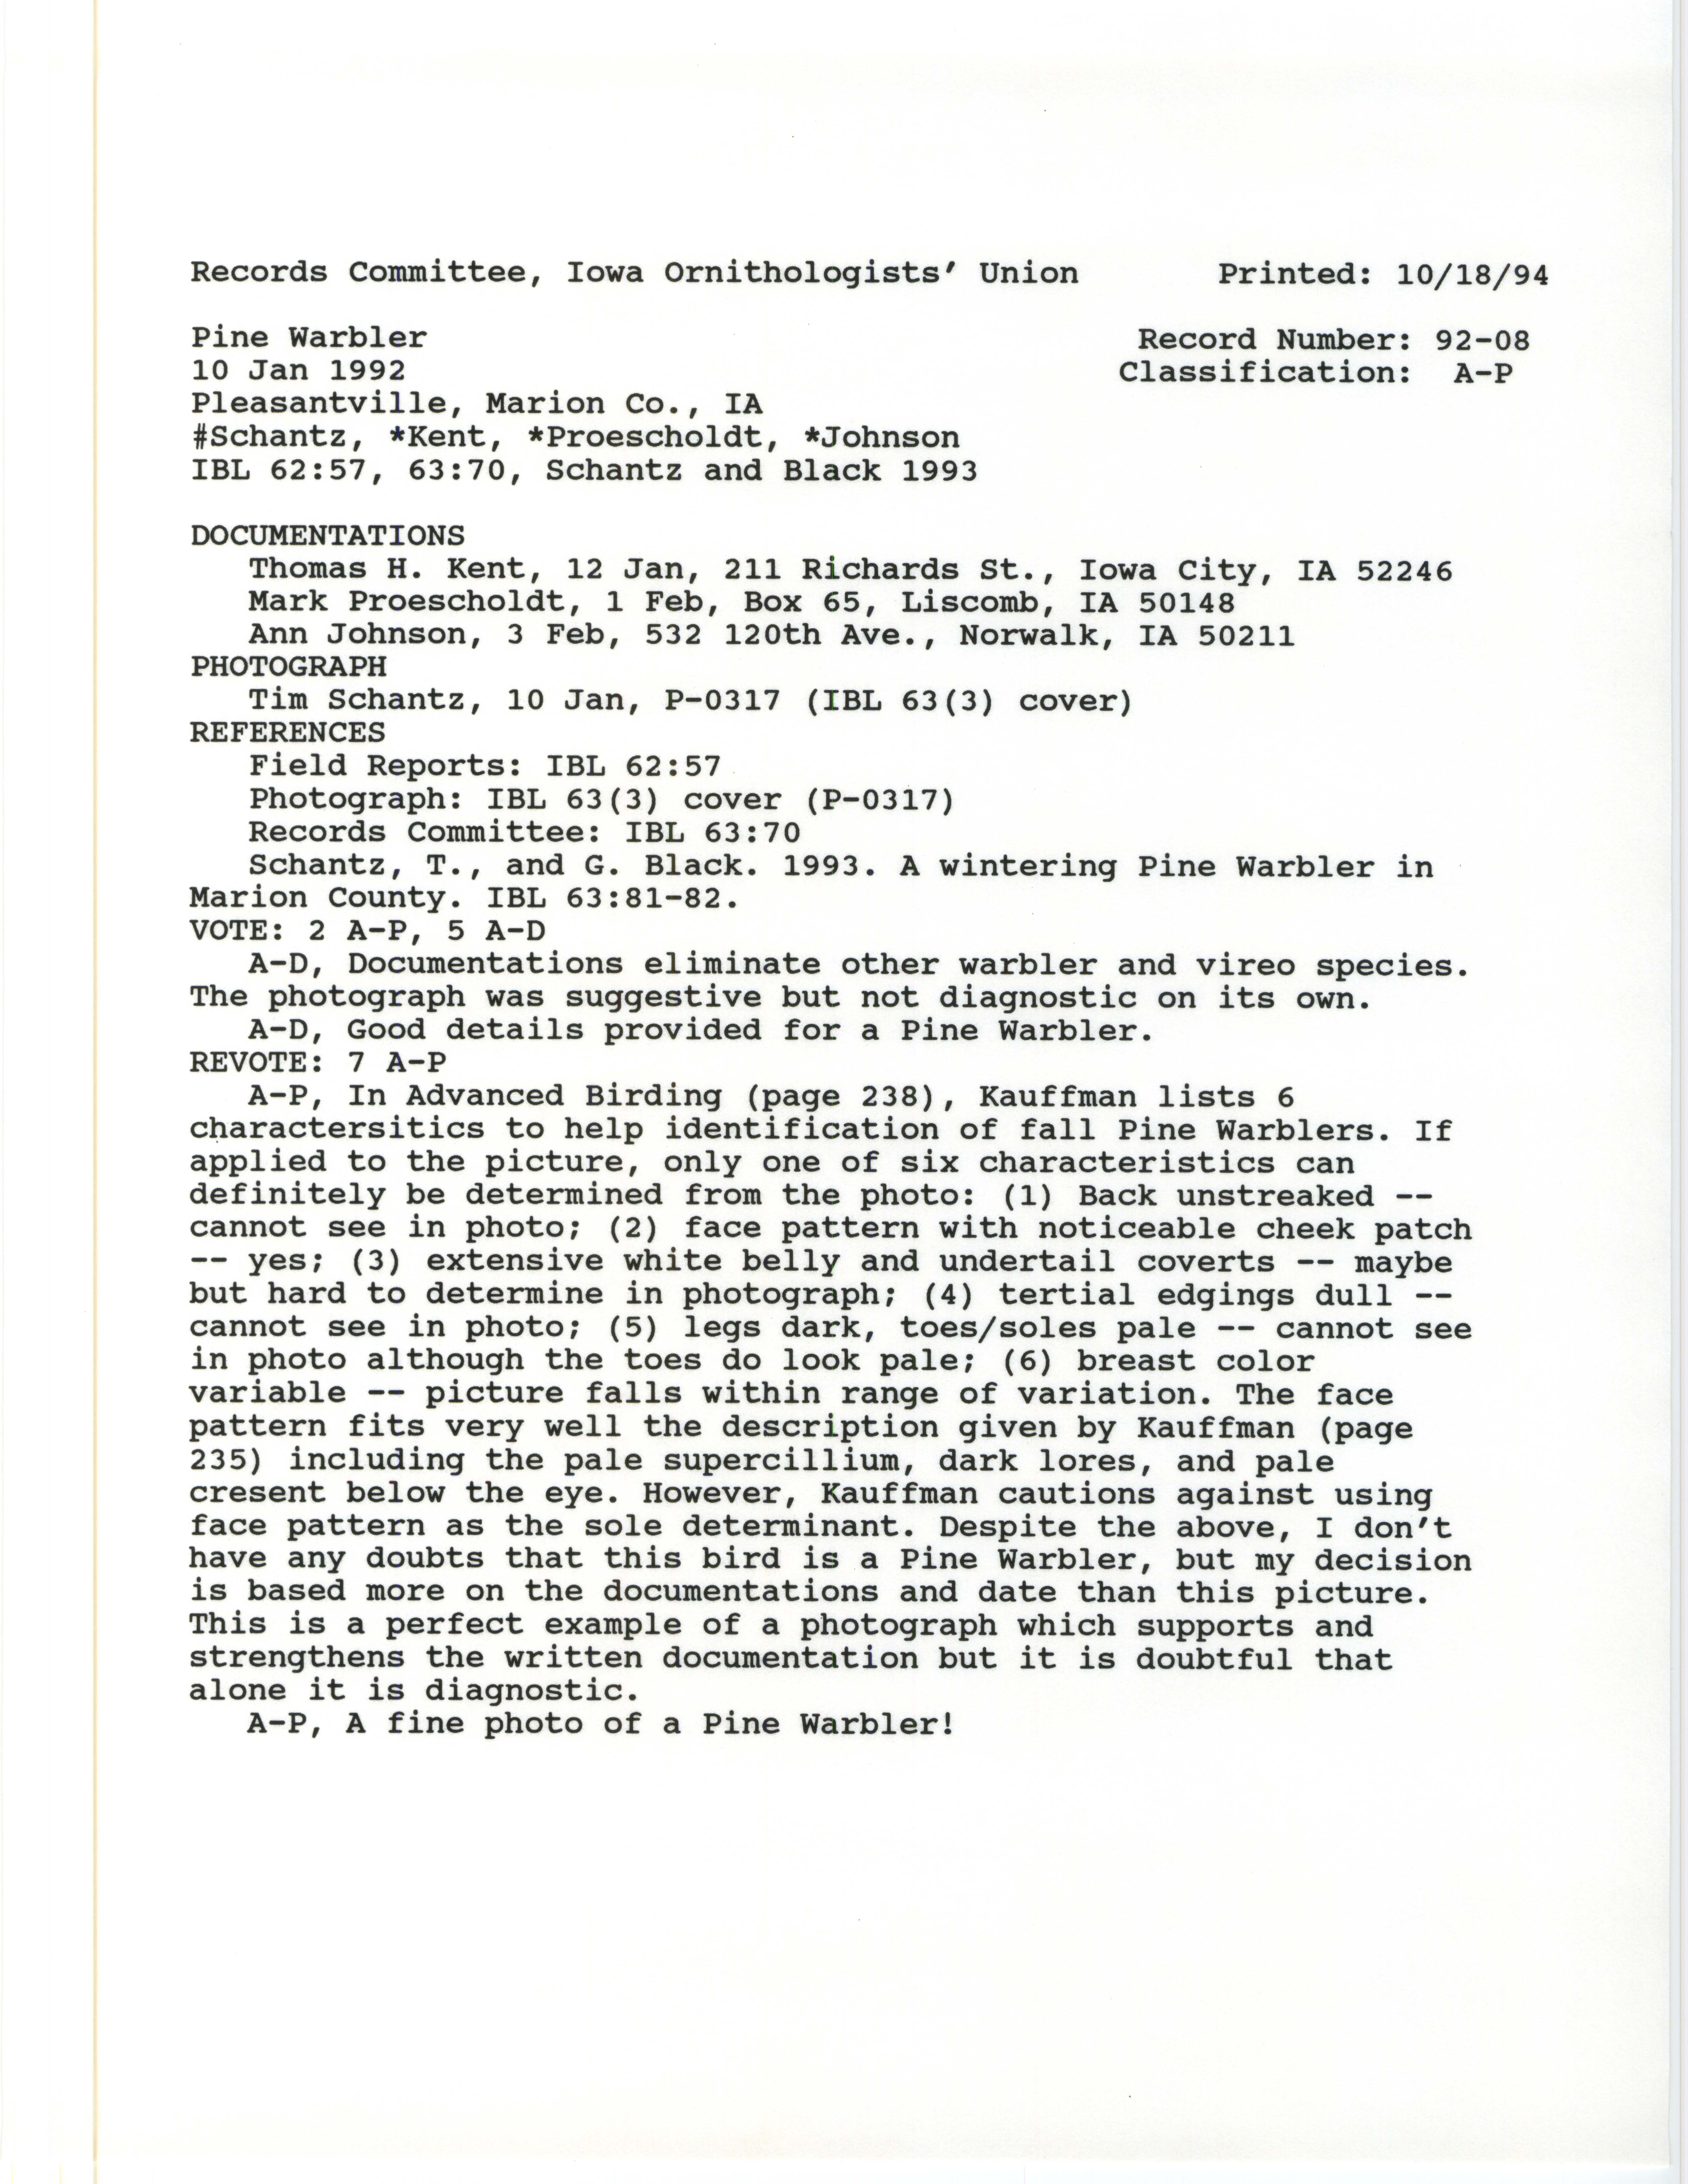 Records Committee review for rare bird sighting for Pine Warbler at Pleasantville, 1992